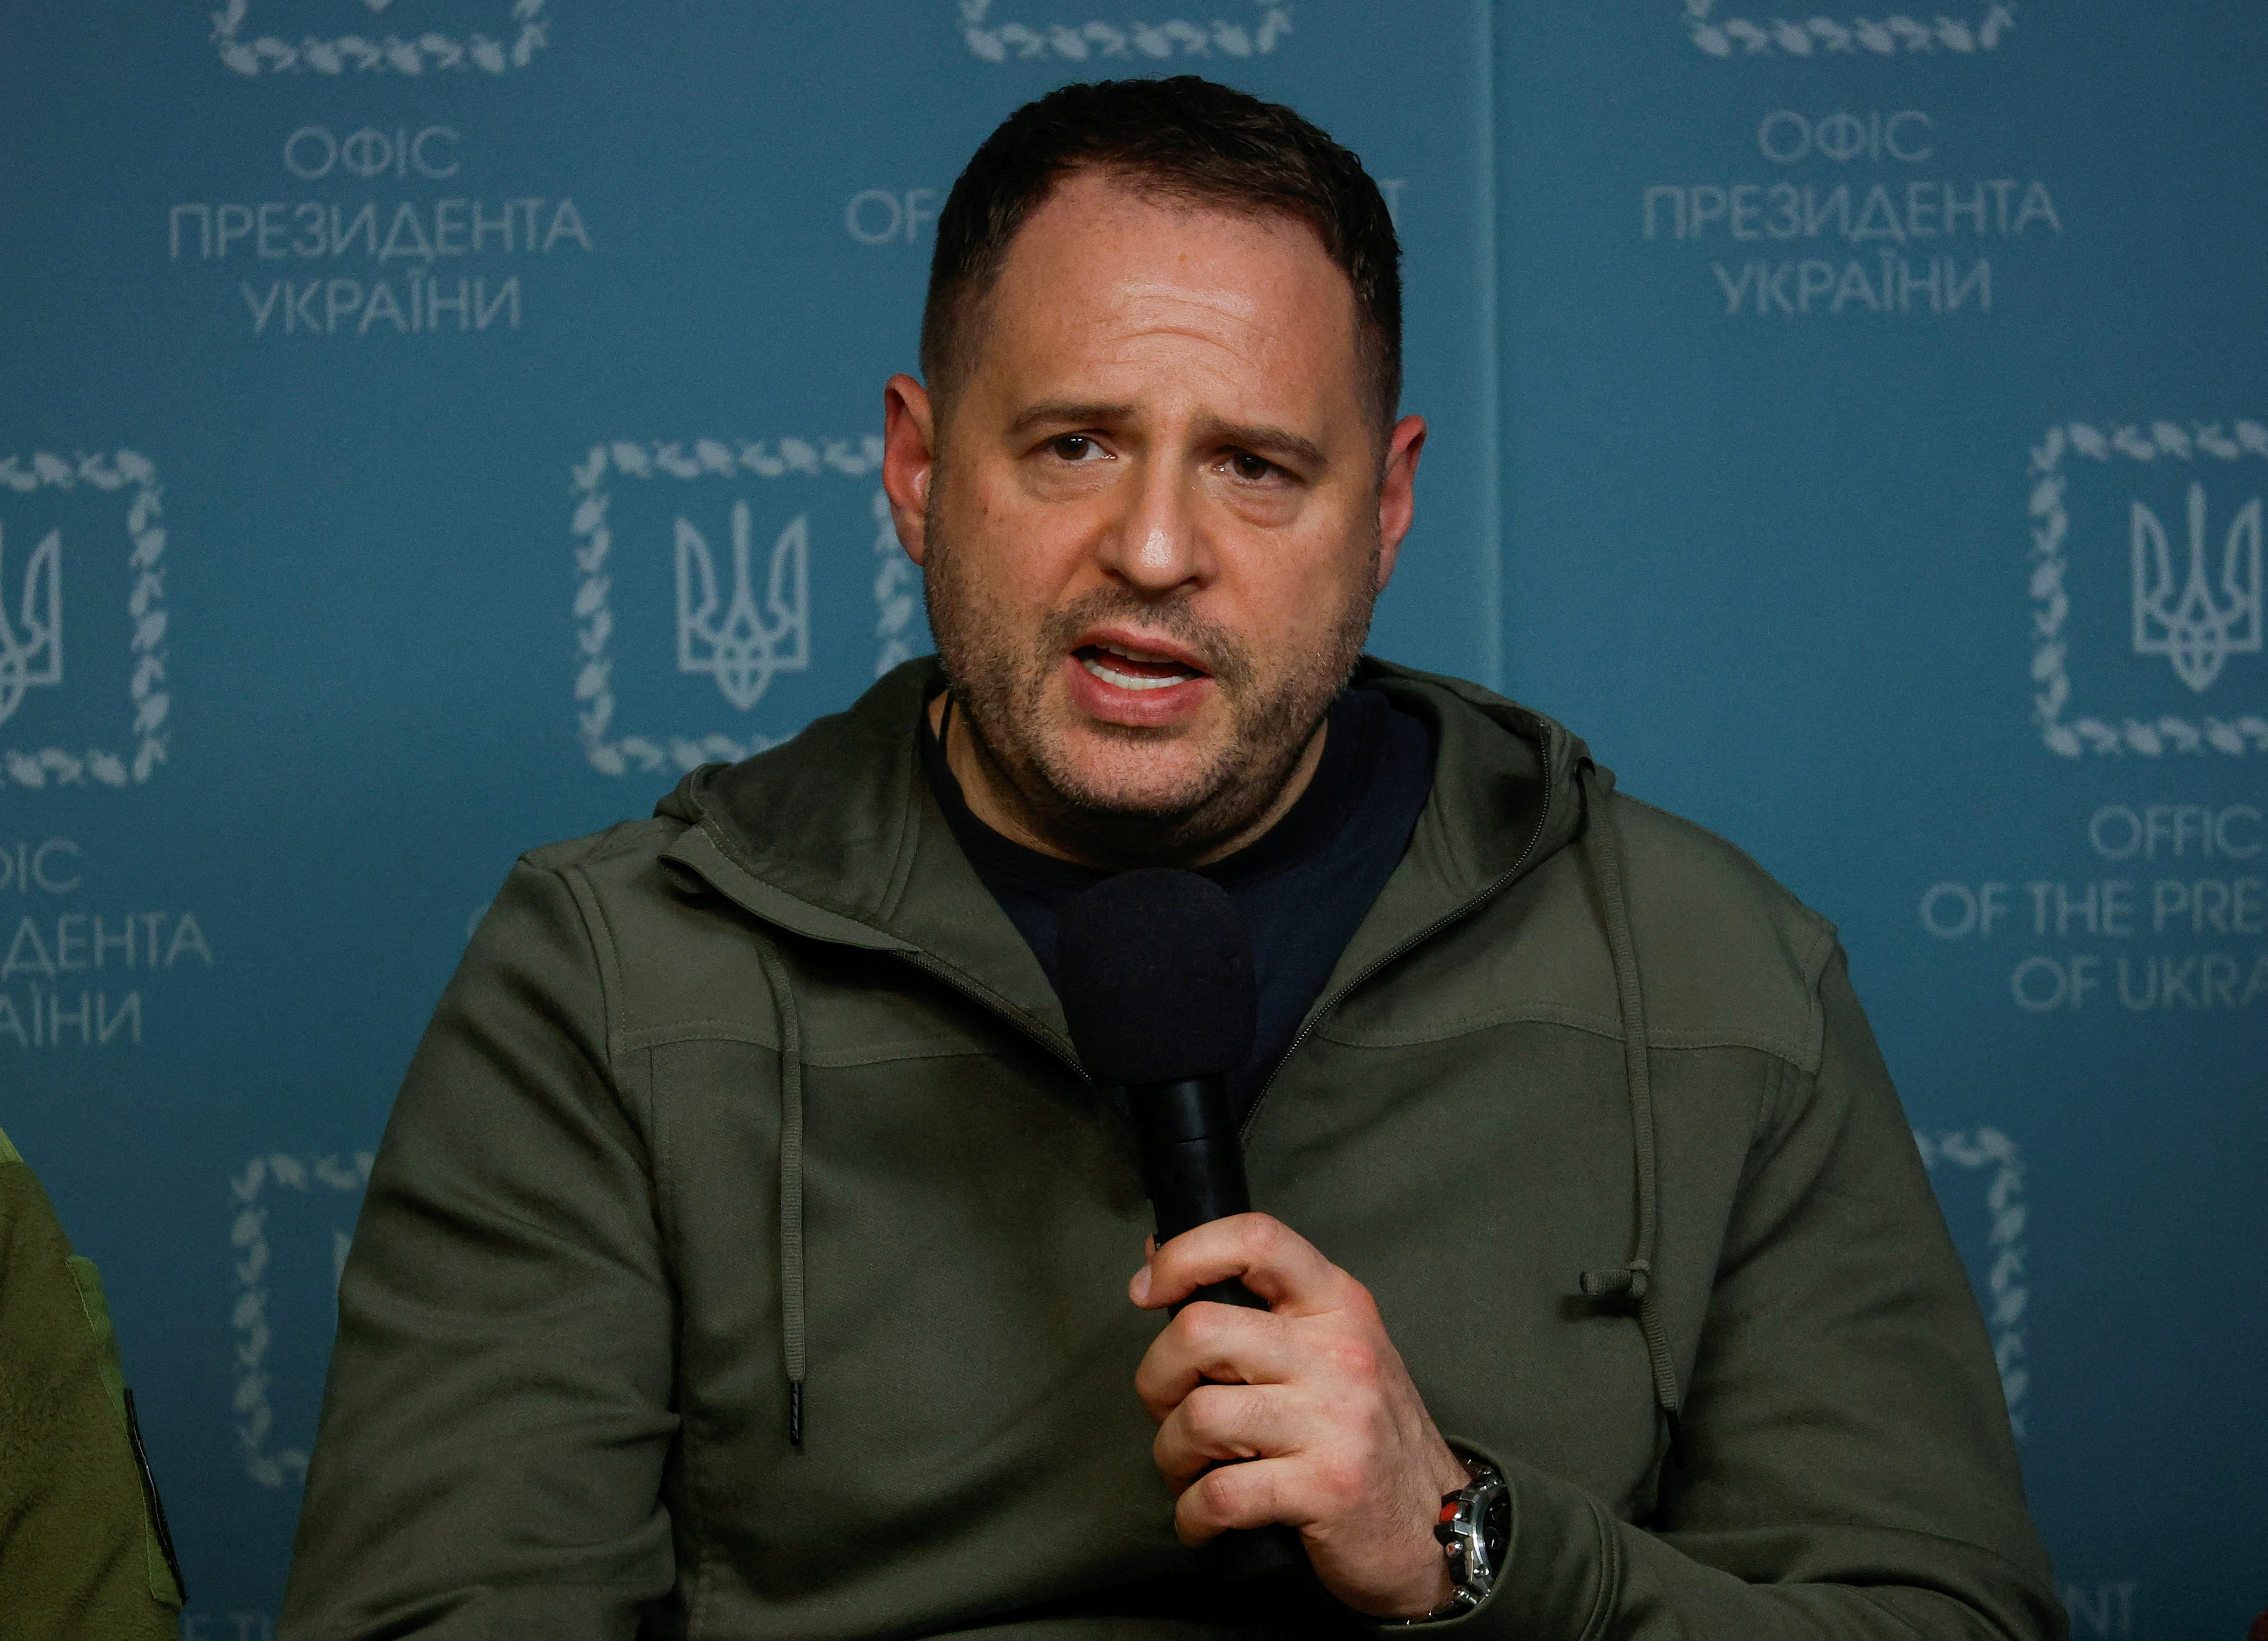 The head of the Ukrainian president's office, Andriy Yermak, attends a news briefing in Kyiv,